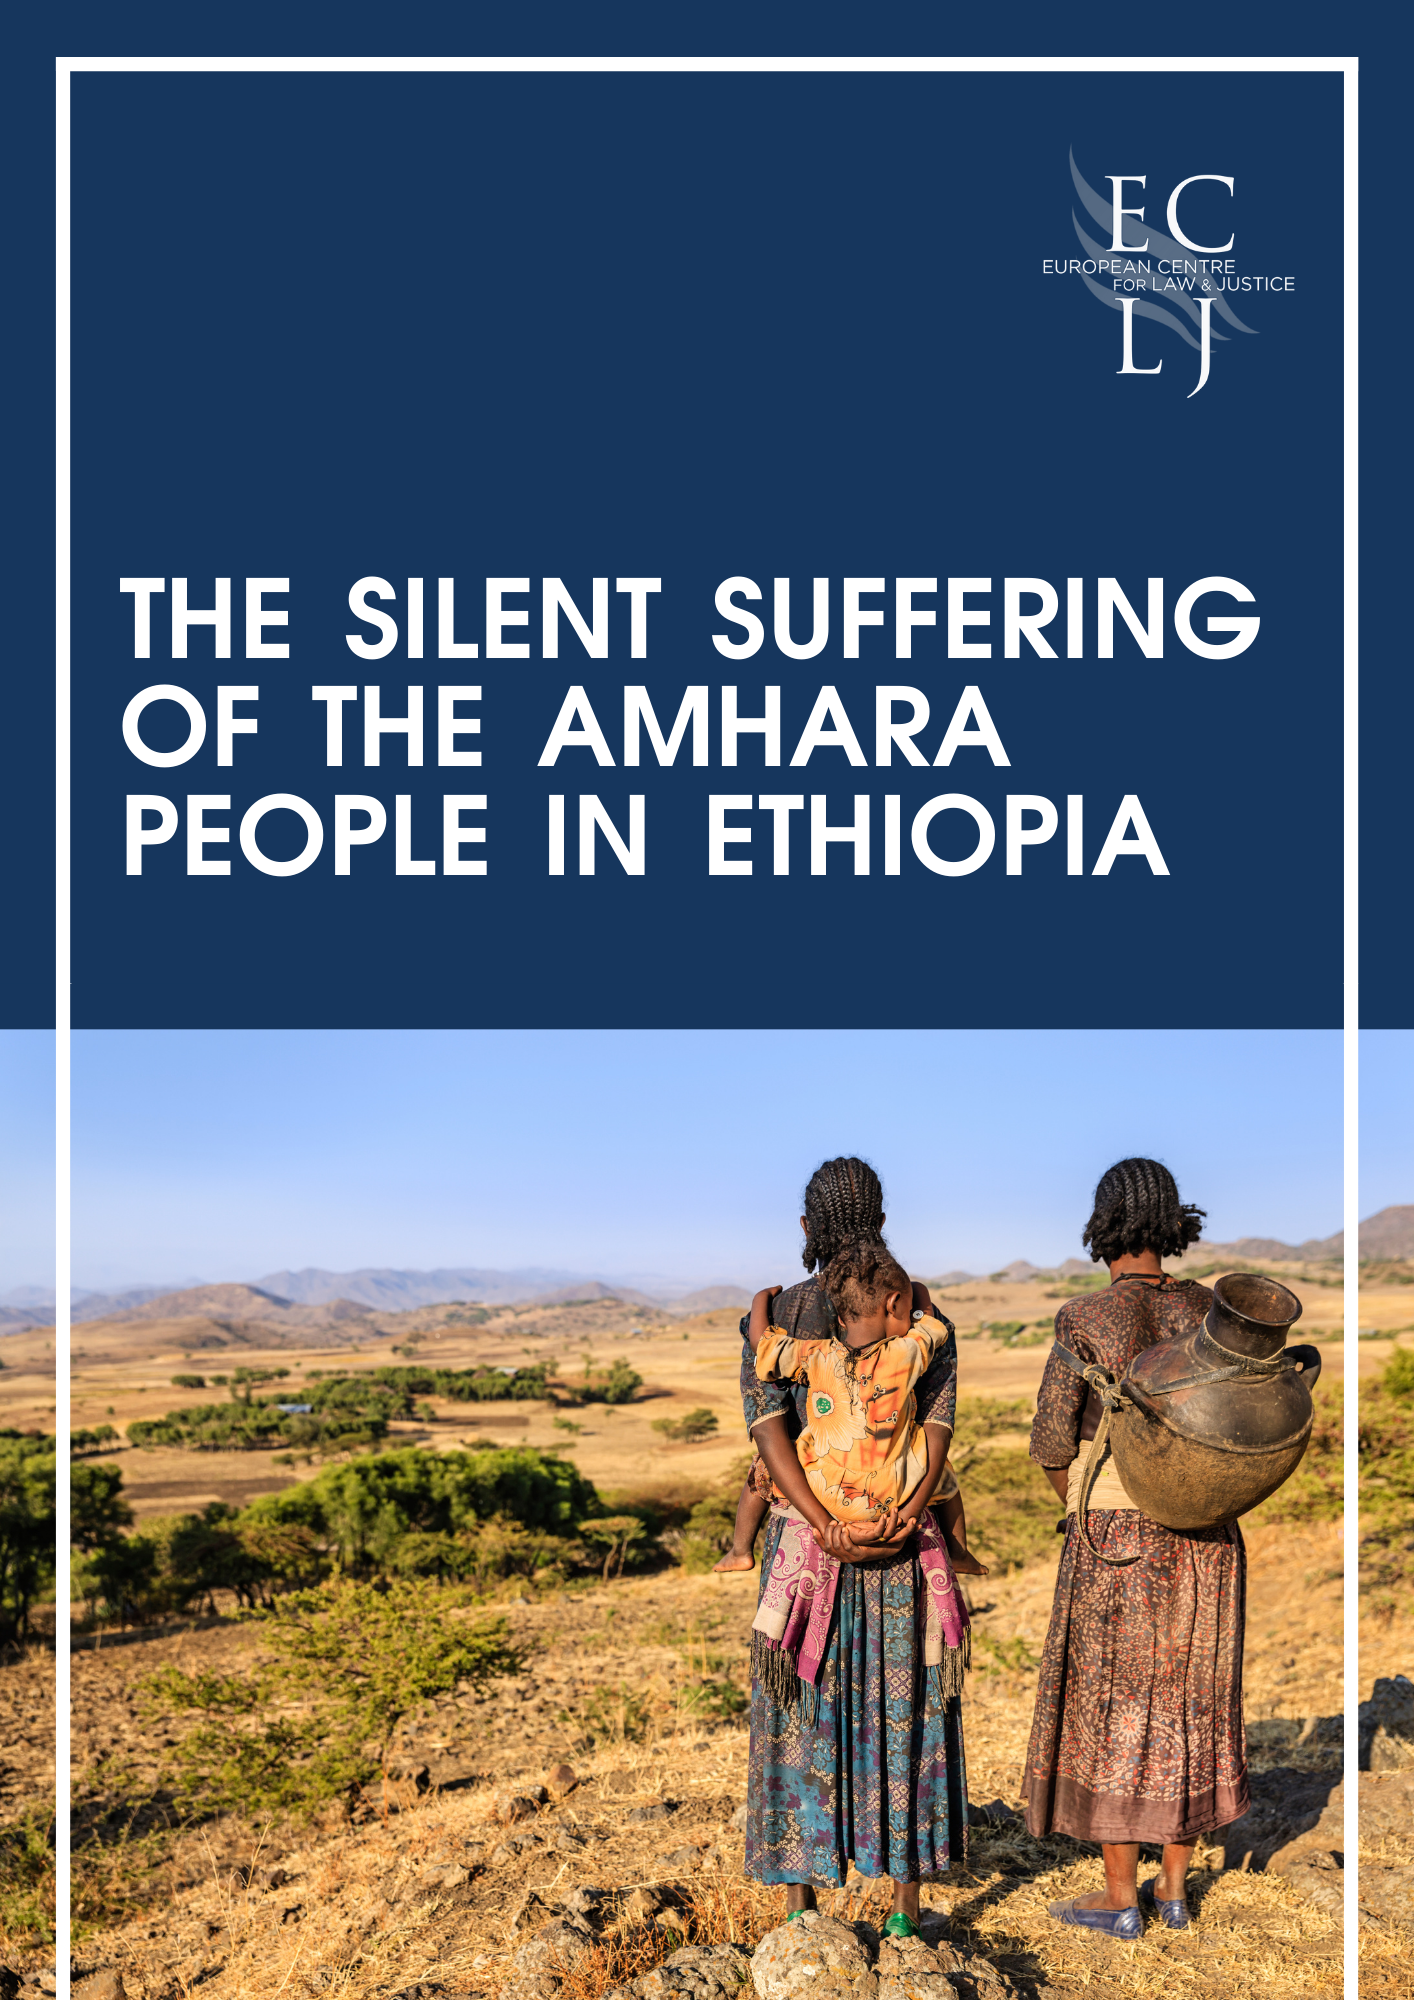 The Silent Suffering of the Amhara People in Ethiopia